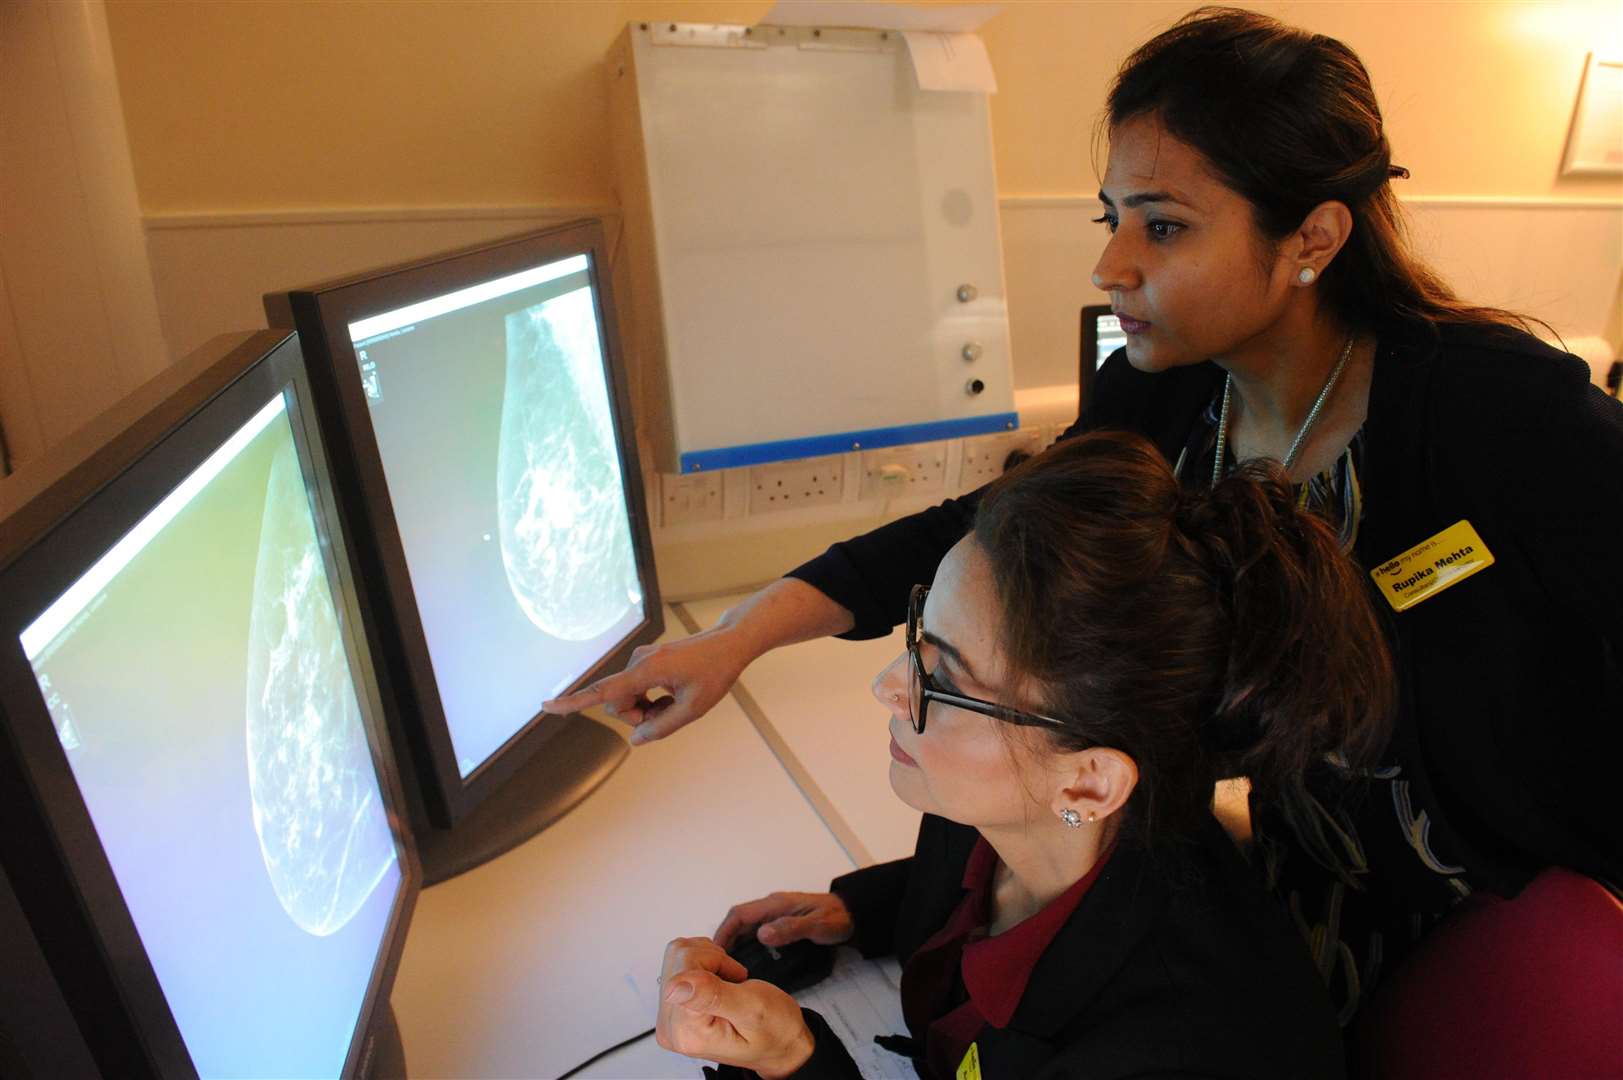 Asma Javed and Rupika Mehta at Medway Hospital checking an x-ray.Picture: Steve Crispe